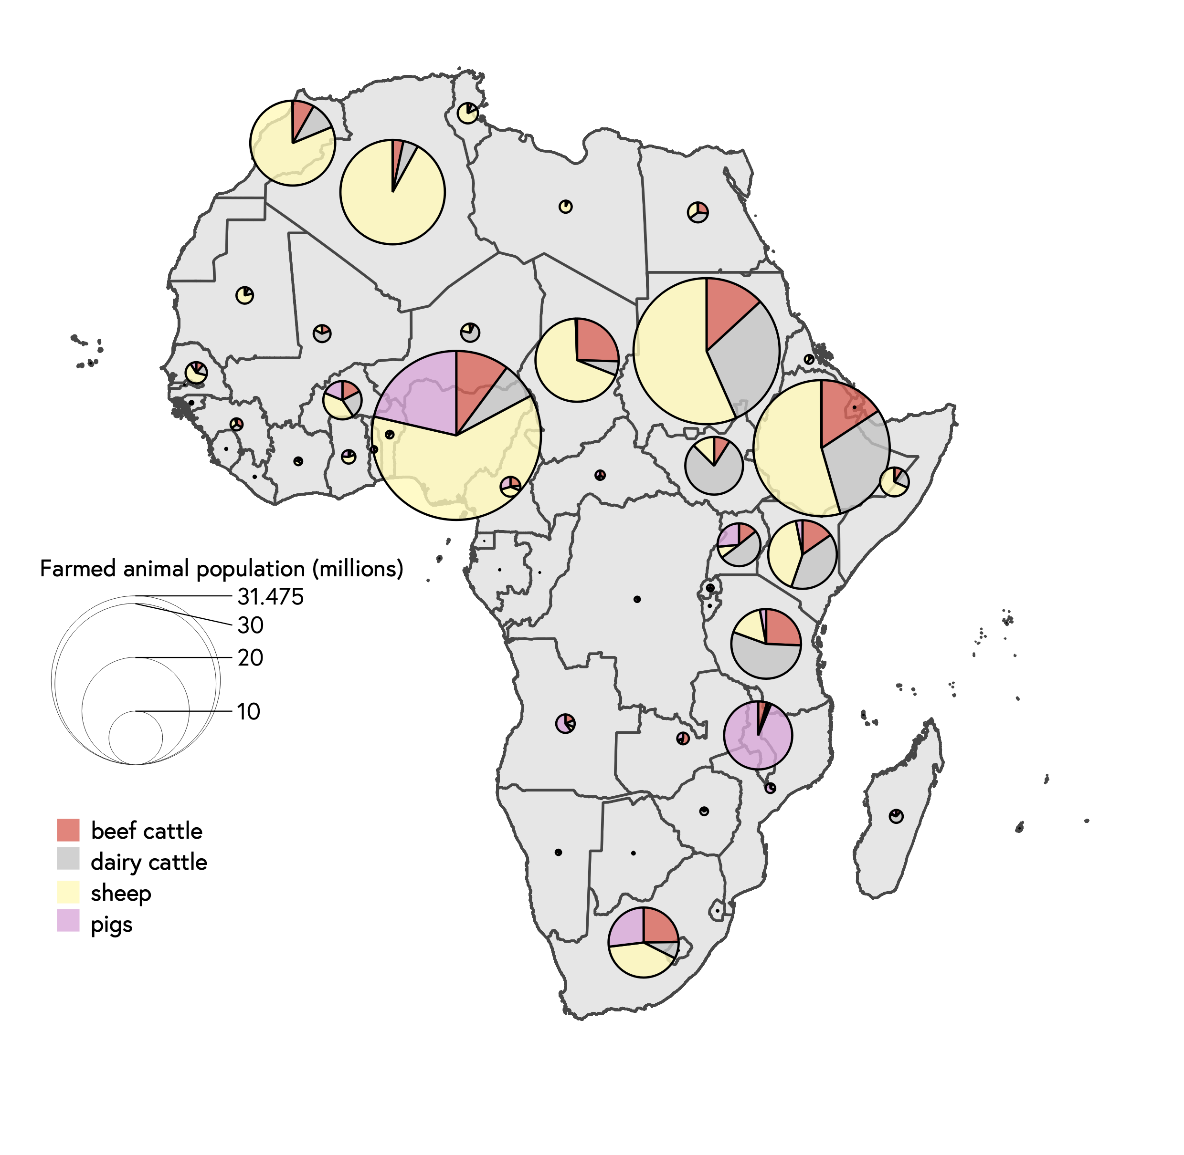 Figure 3: Farmed animal populations across Africa excluding chickens, 2020. Data source: FAOSTAT database.